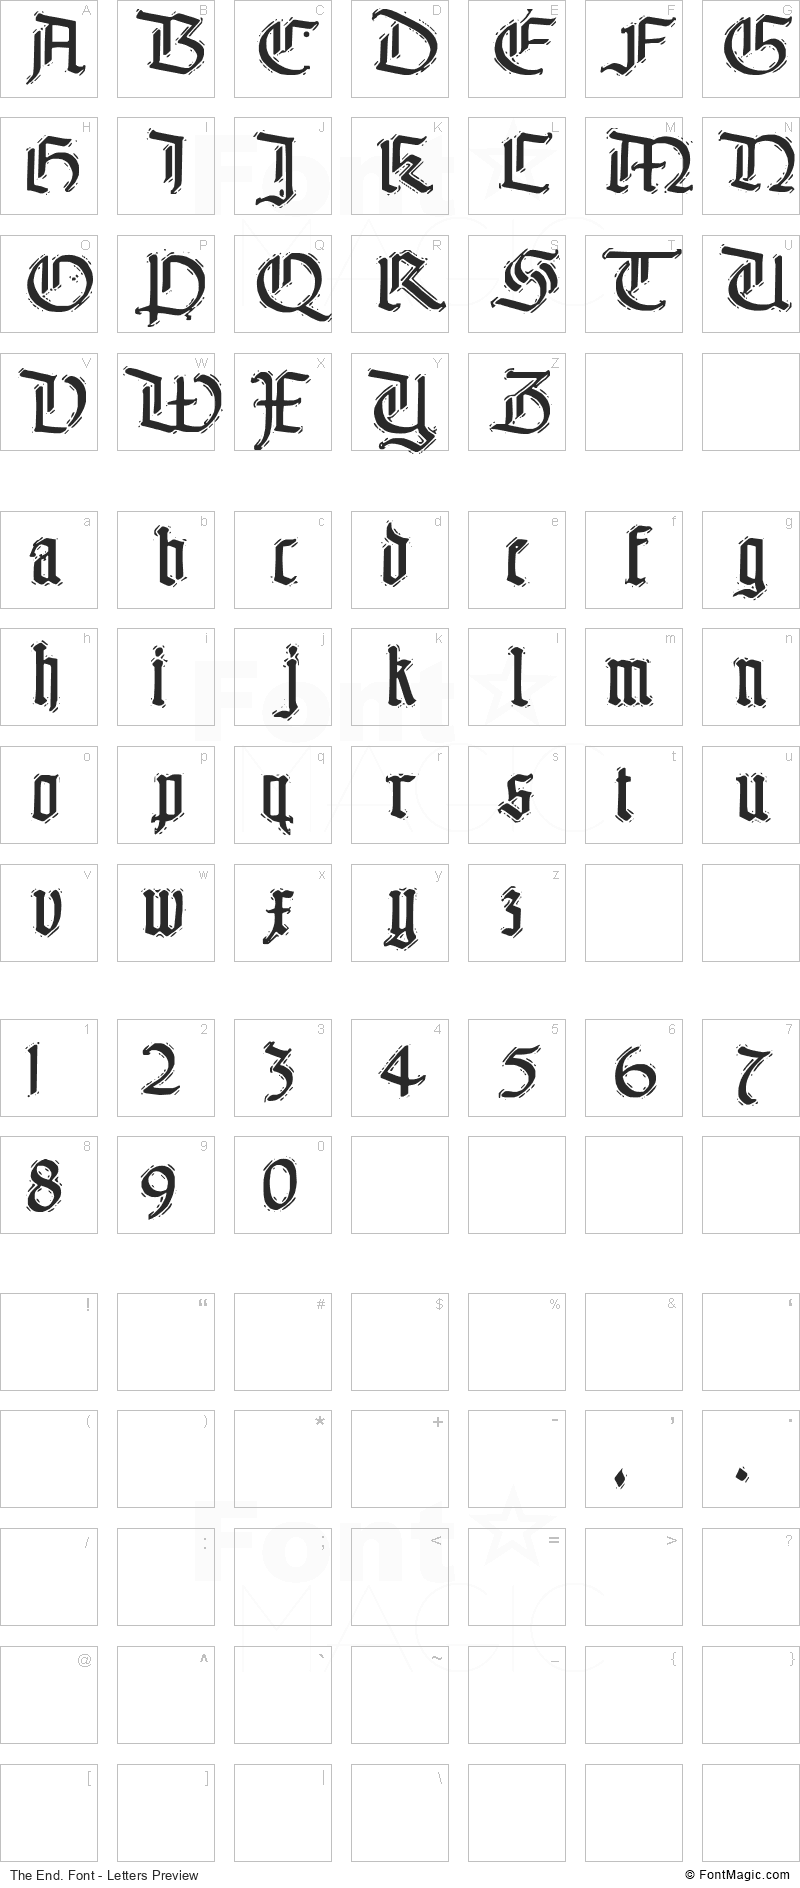 The End. Font - All Latters Preview Chart